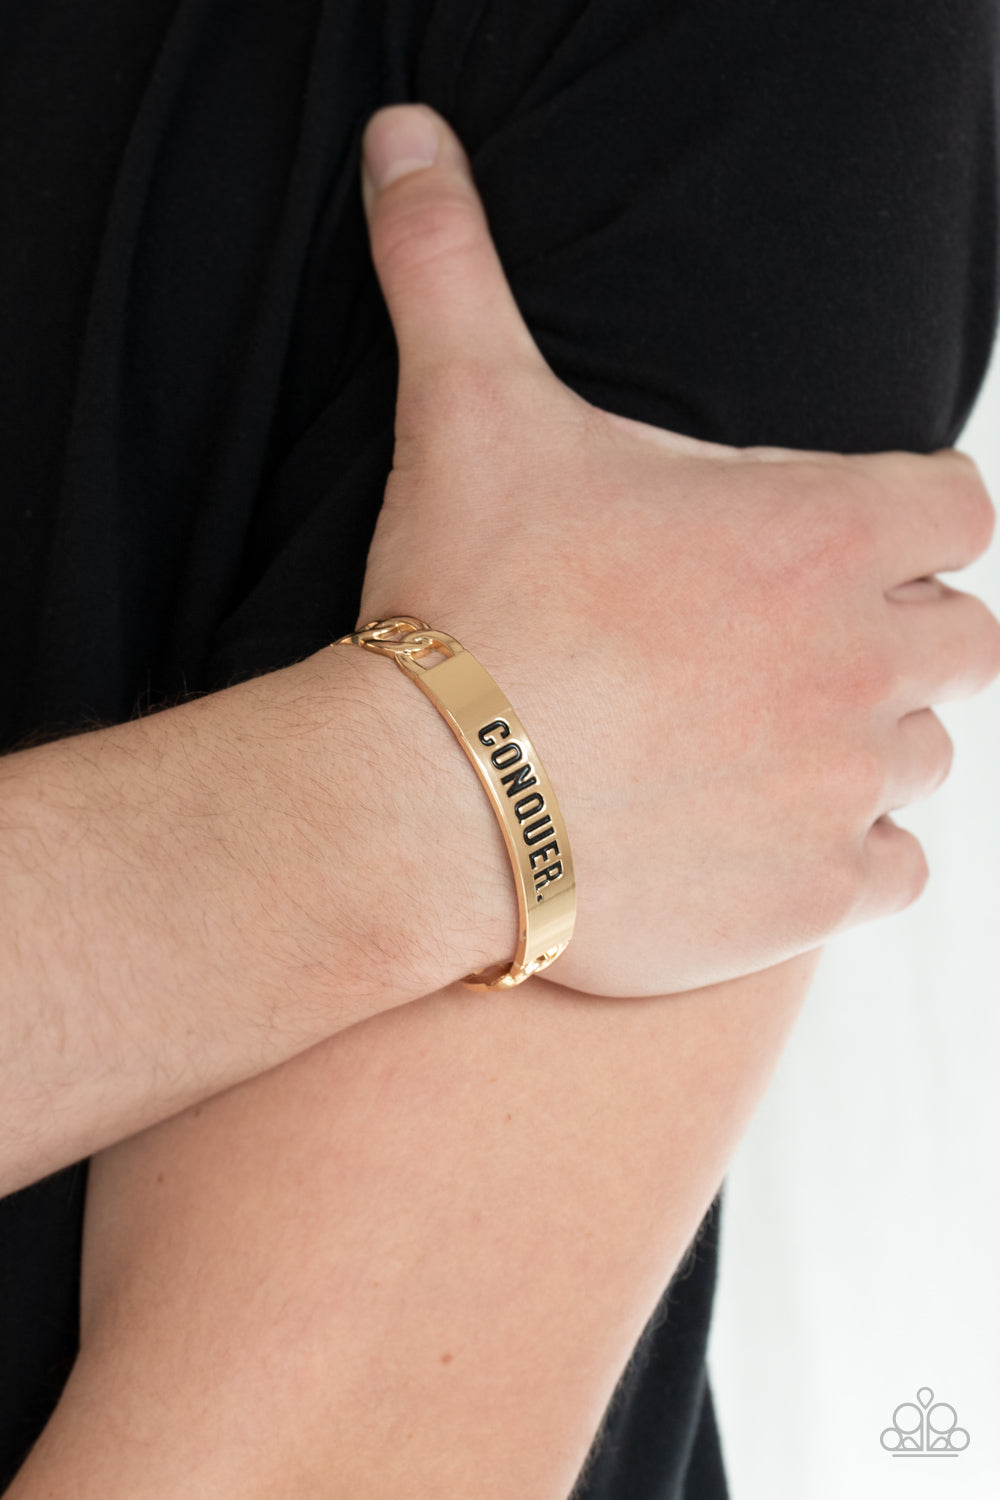 Conquer Your Fears Bracelets - Gold